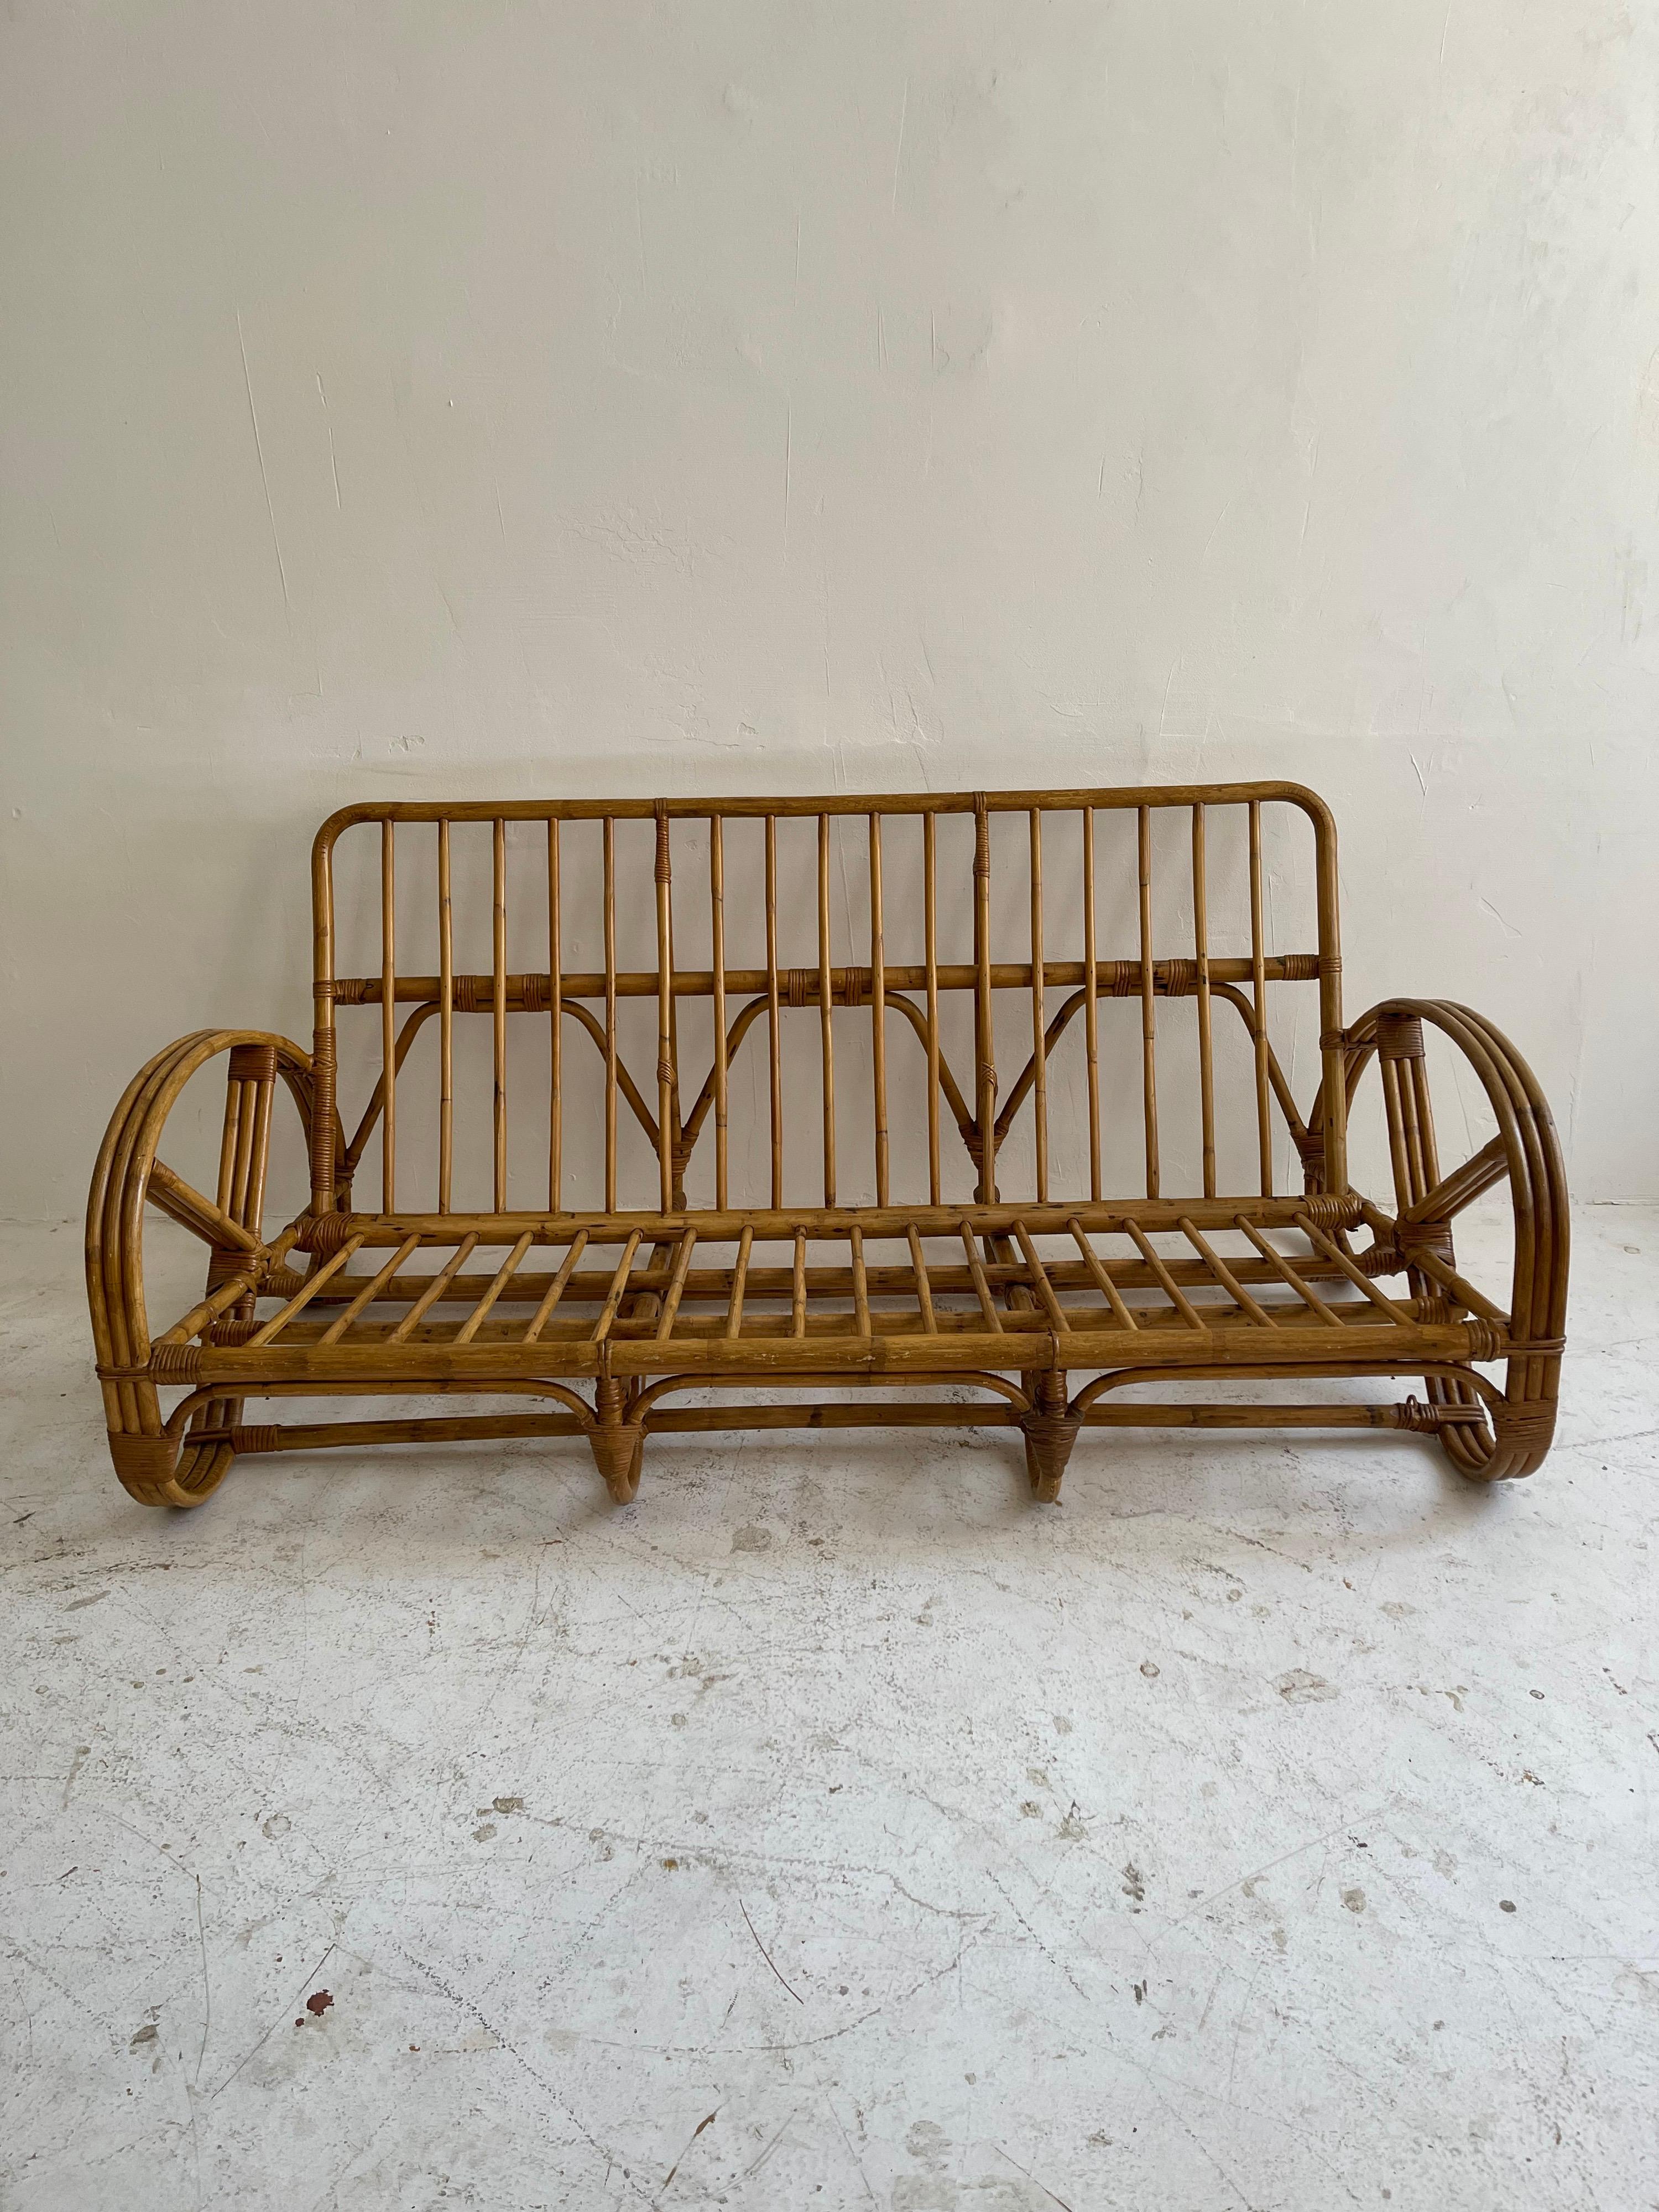 Bamboo rattan pretzel living room suite sofa chairs table, France 1950s. Consists of one sofa, three matching lounge chairs and coffee table.